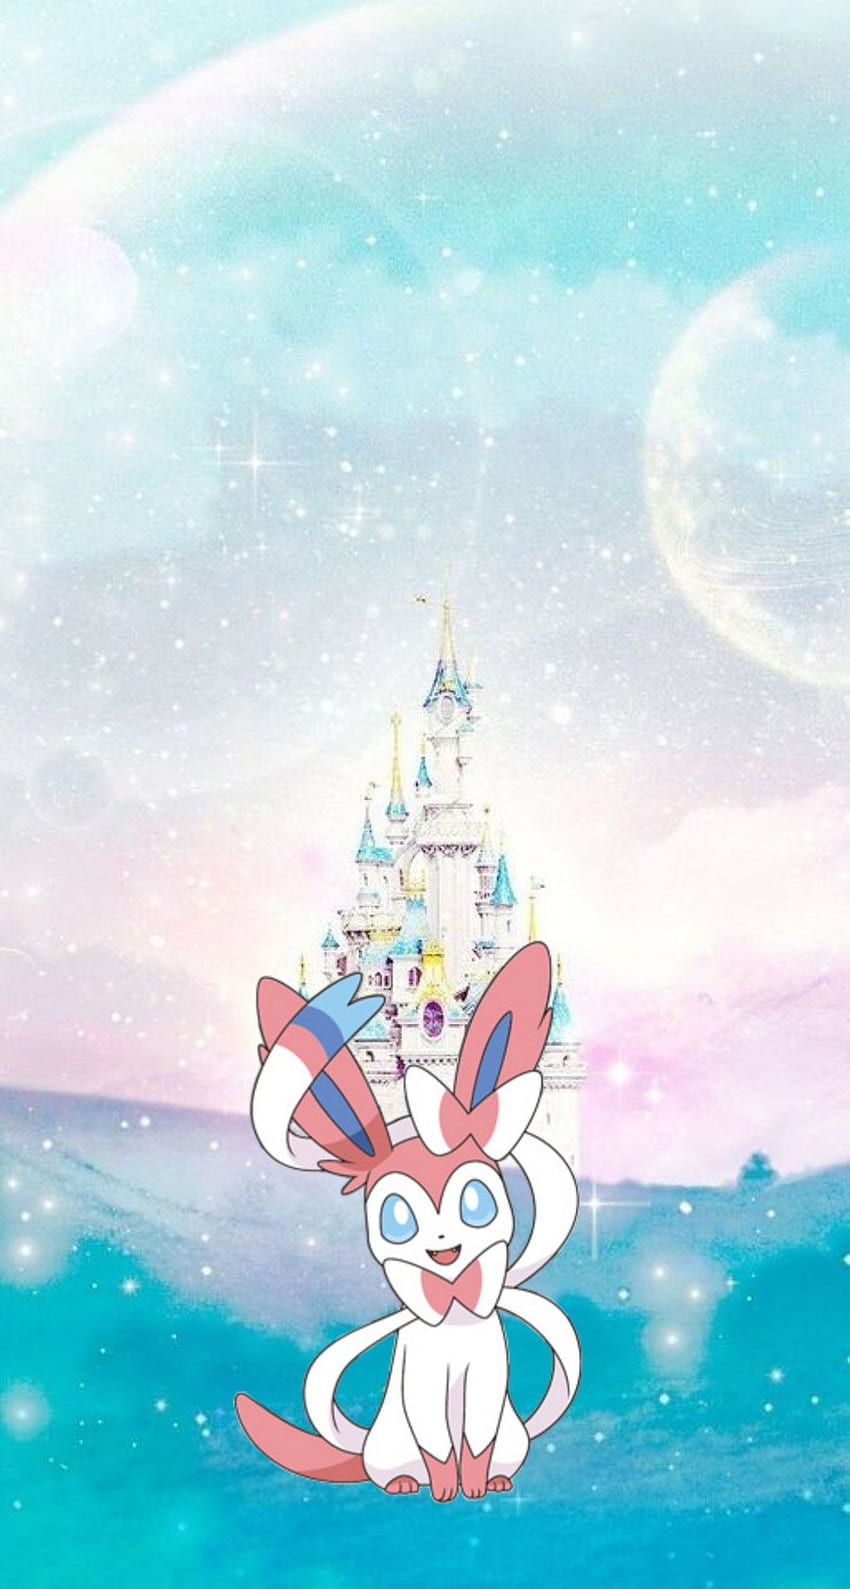 Mobile wallpaper Sylveon Pokémon Eeveelutions Pokémon Video Game  329809 download the picture for free